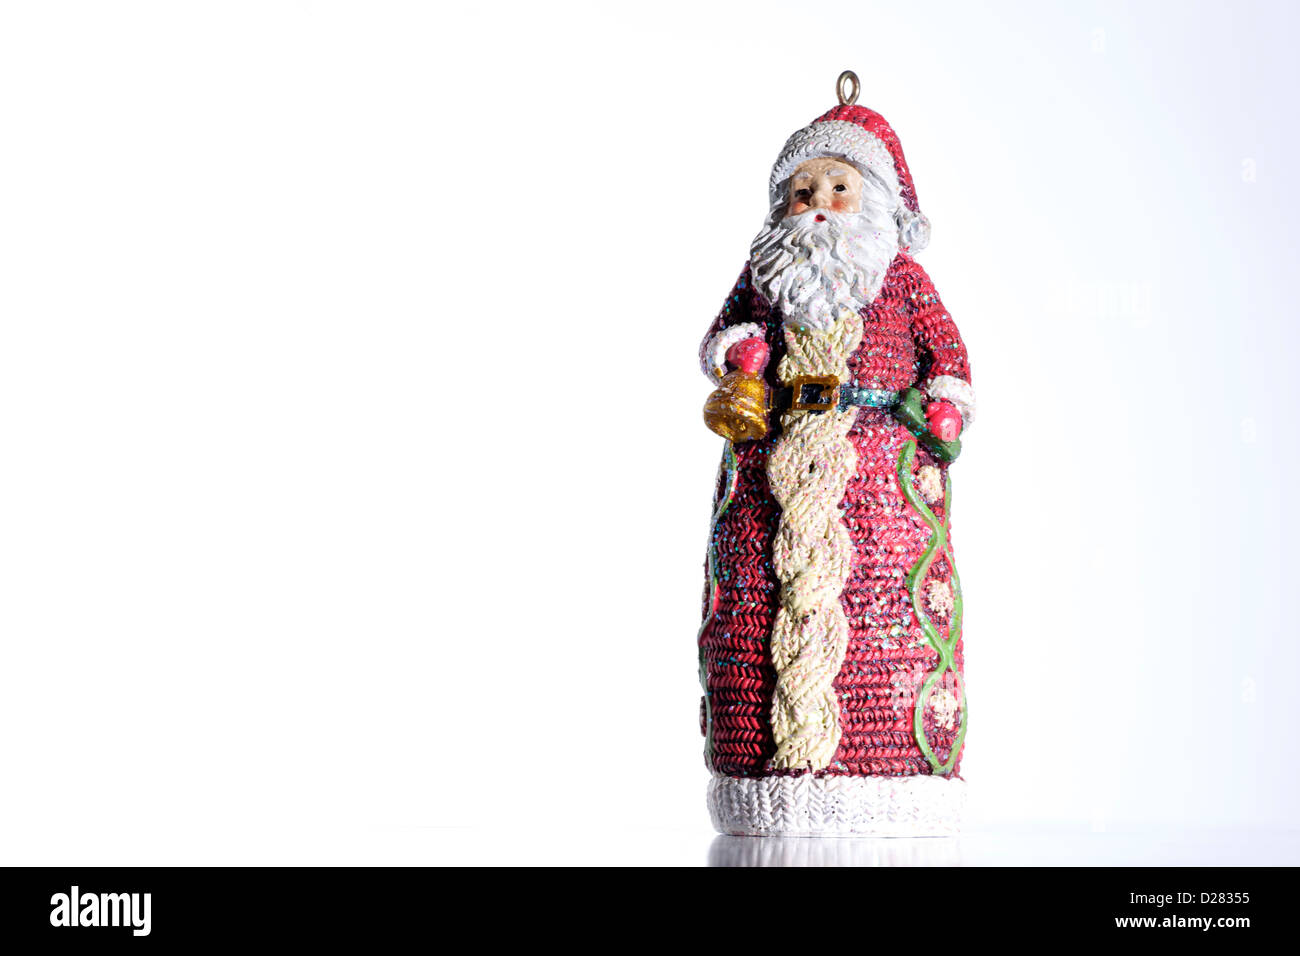 Statue of traditional Santa Claus Stock Photo